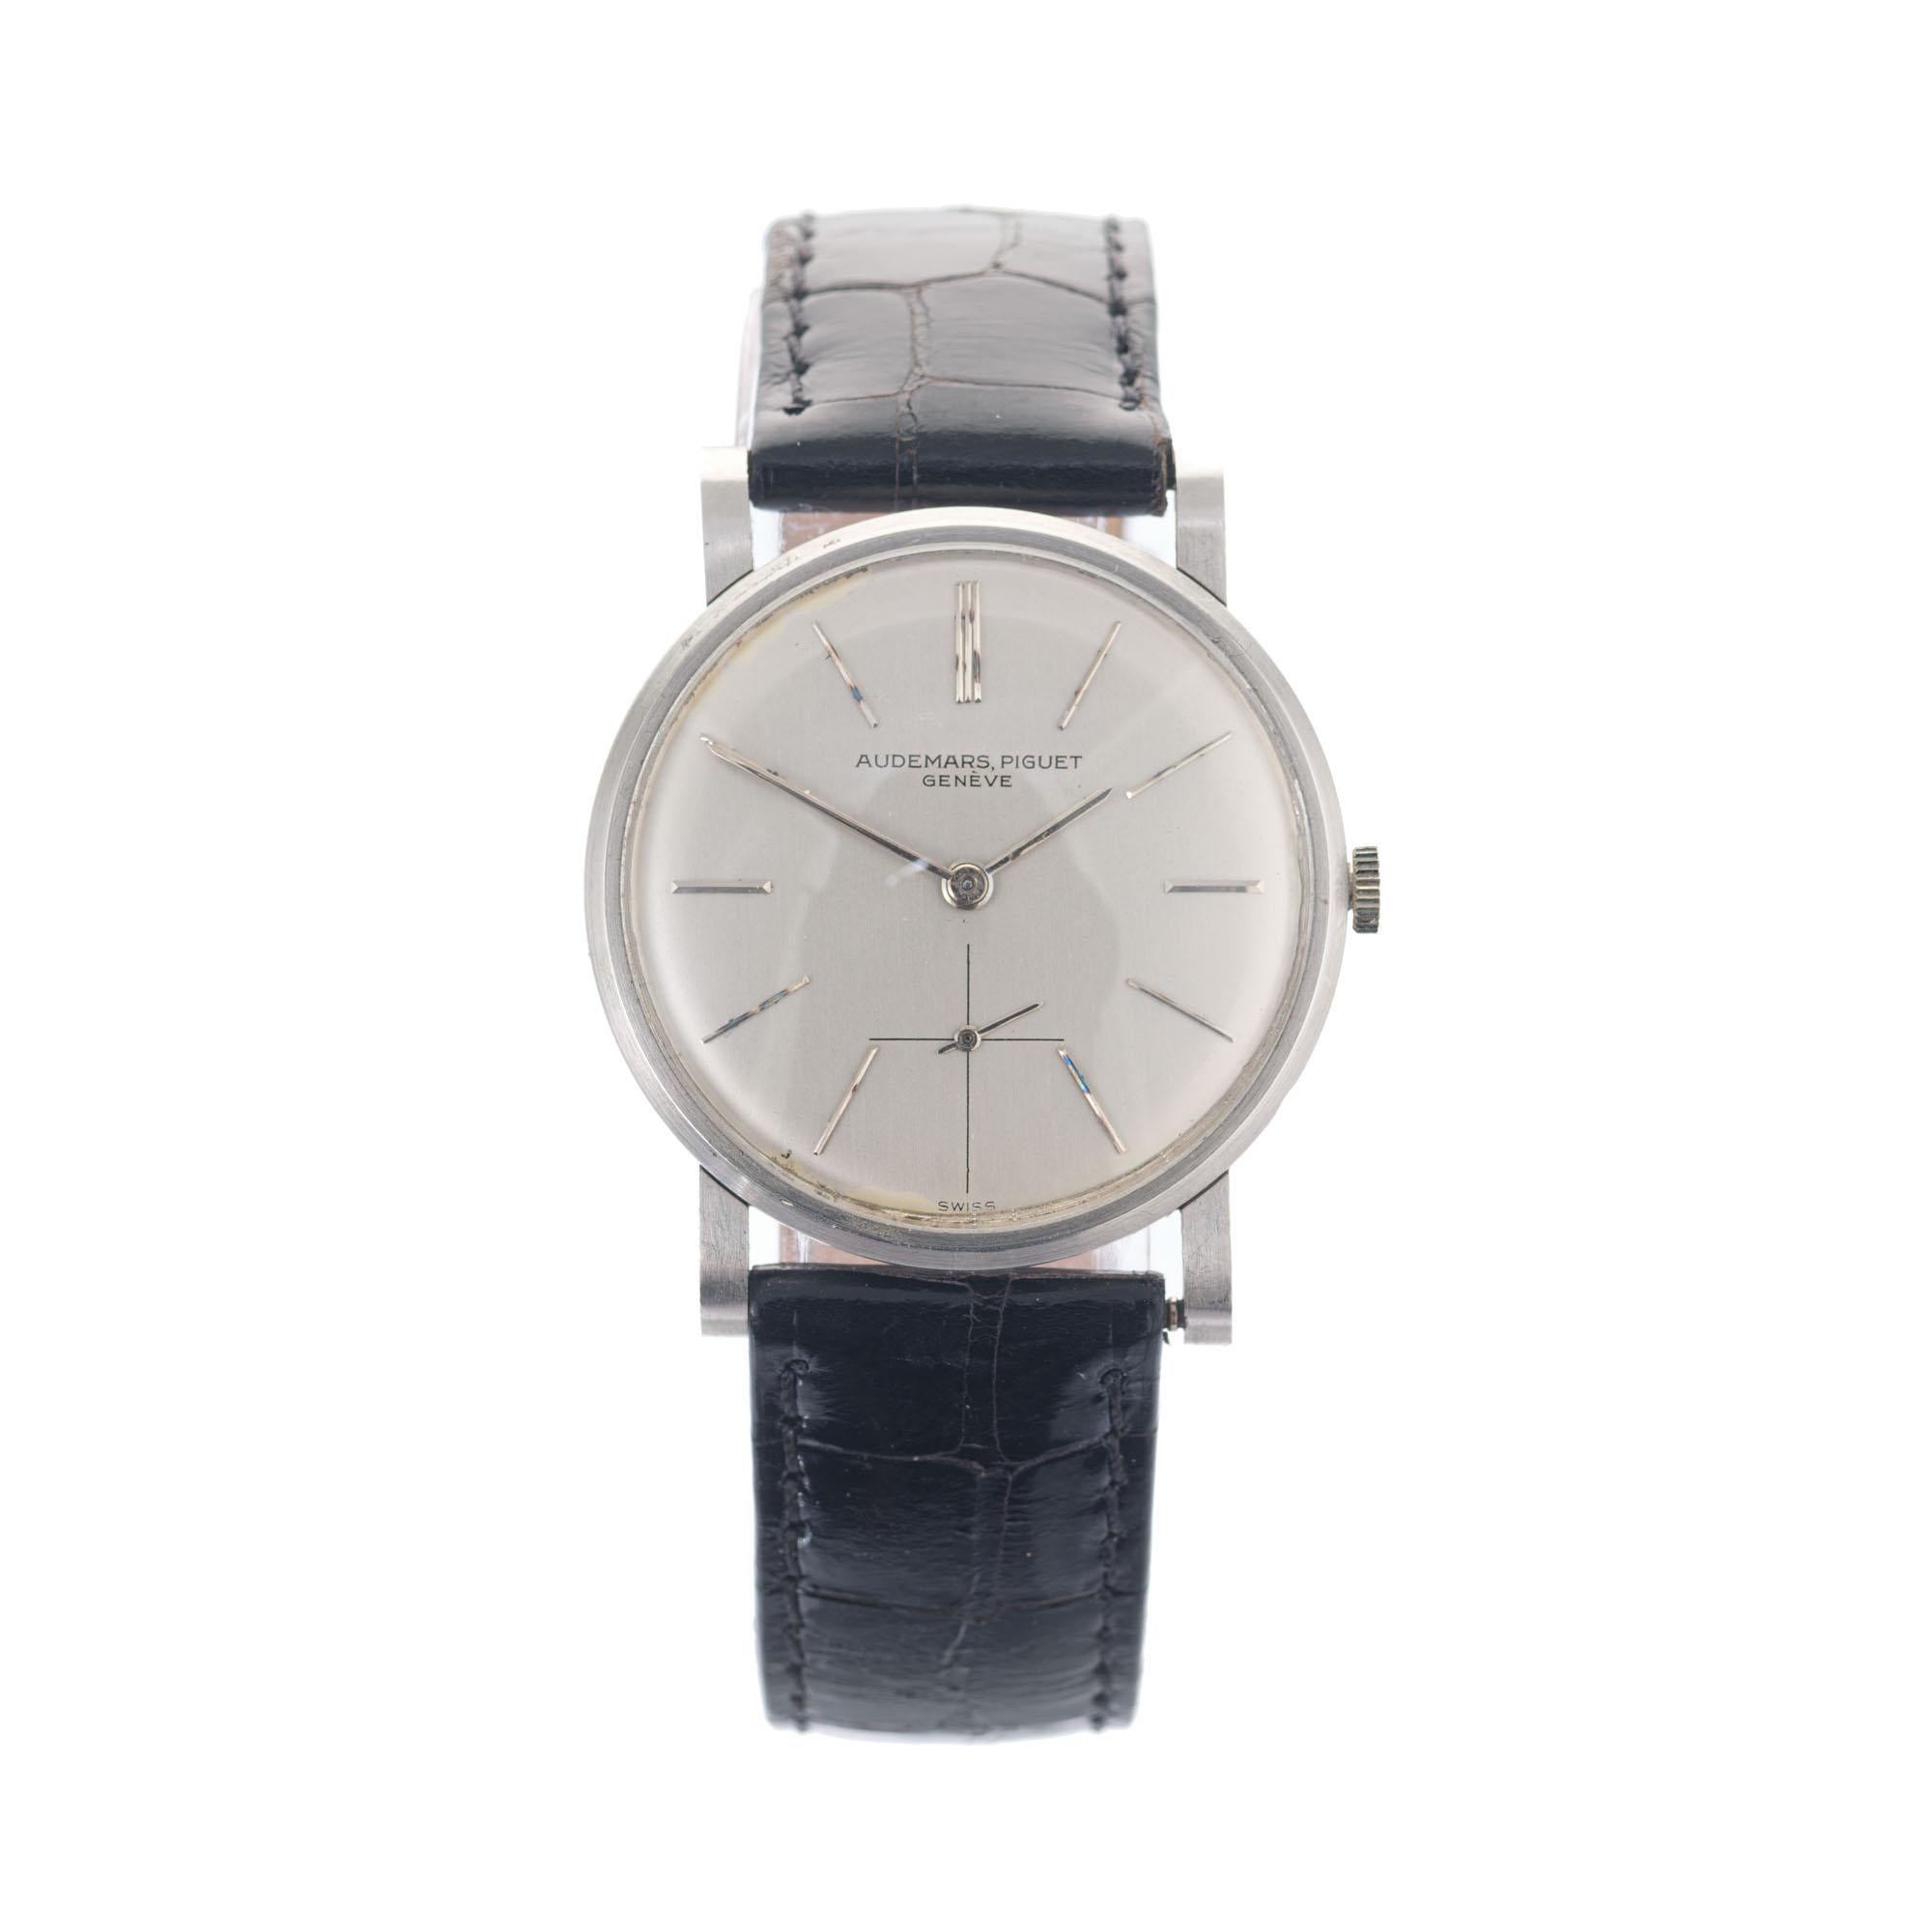 From the Estate of son writer Neil Levenson Classic simple Audemars Piguet 18 jewel manual wind 1960’s watch. Documentation enclosed. Engraved from Neil to his Dad. Authenticated in Provence paperwork. Called by some the Calatrava model of the